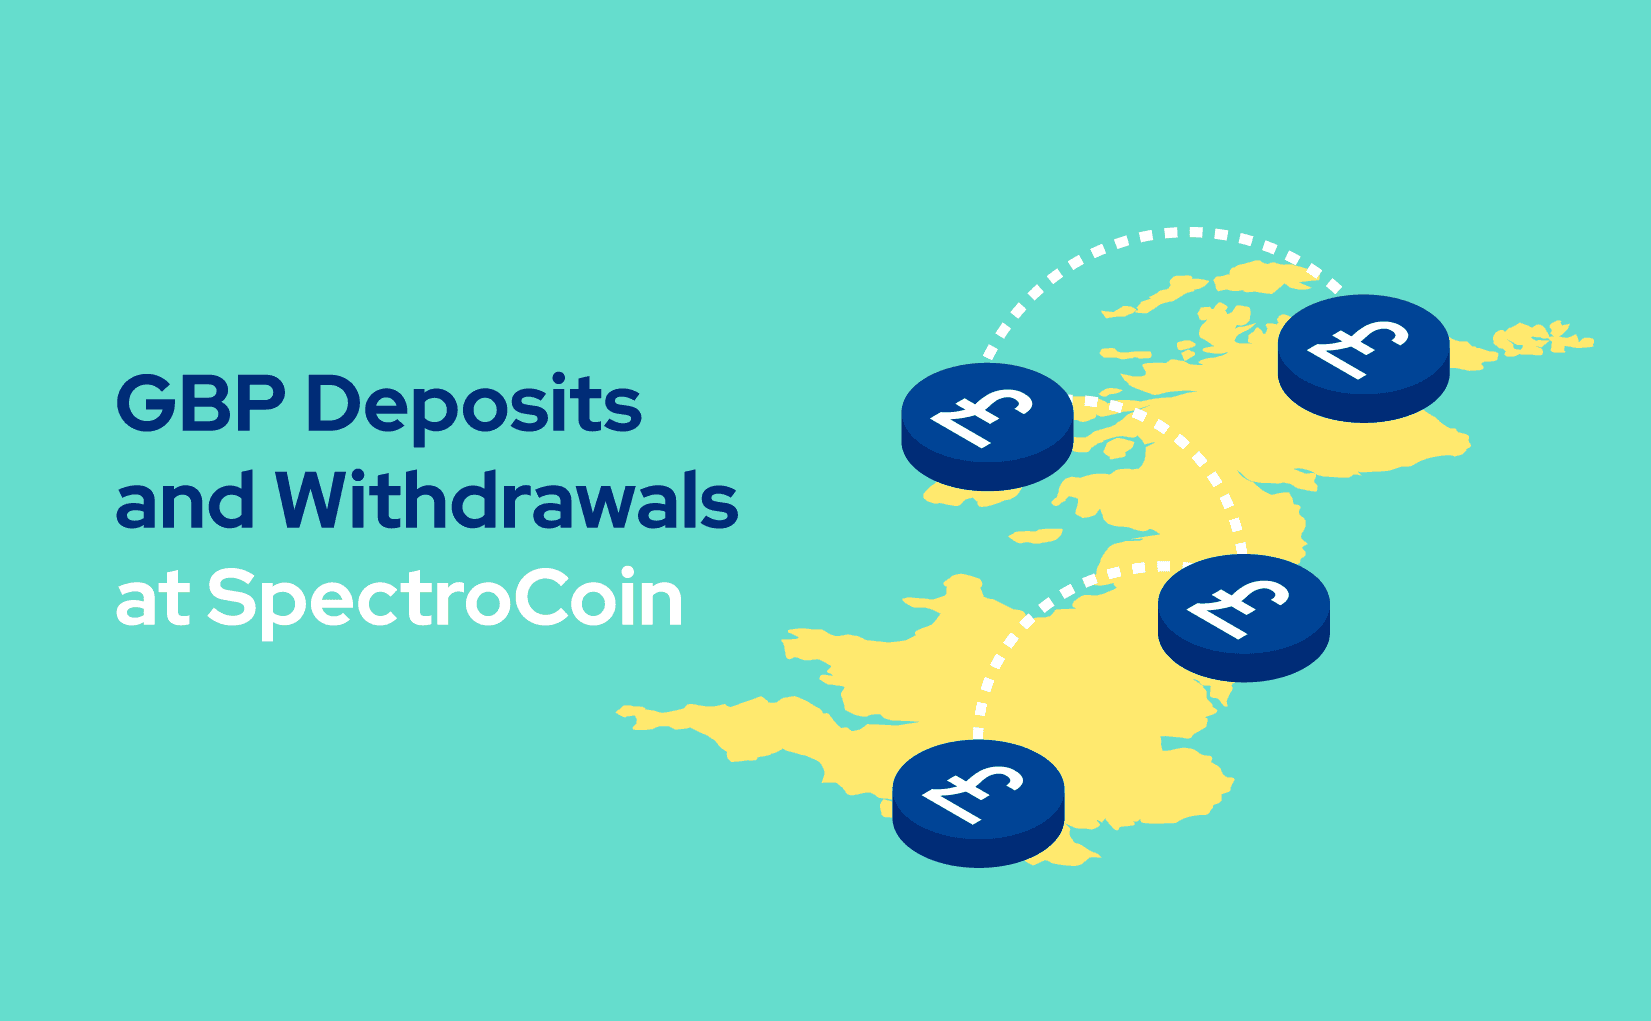 In this blog post, we present local bank transfers at SpectroCoin.